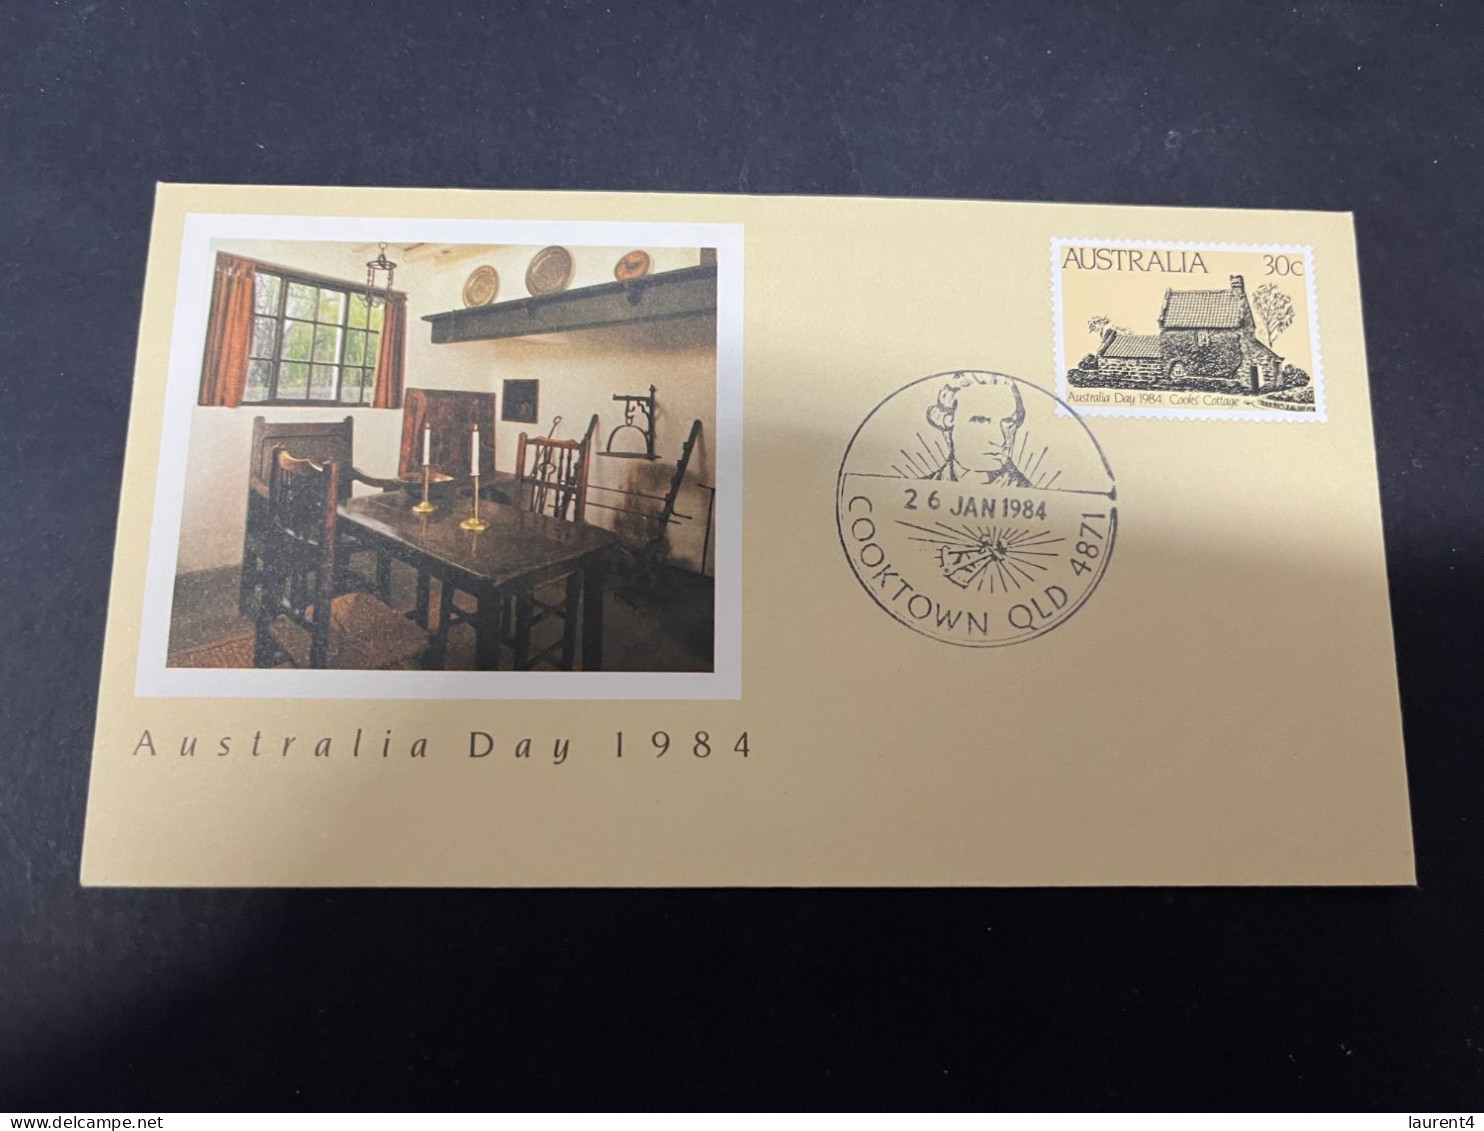 26-3-2024 (4 Y 9) Australia (3 With With Different Postmark) FDC - Australia Day 1984 - Sobre Primer Día (FDC)